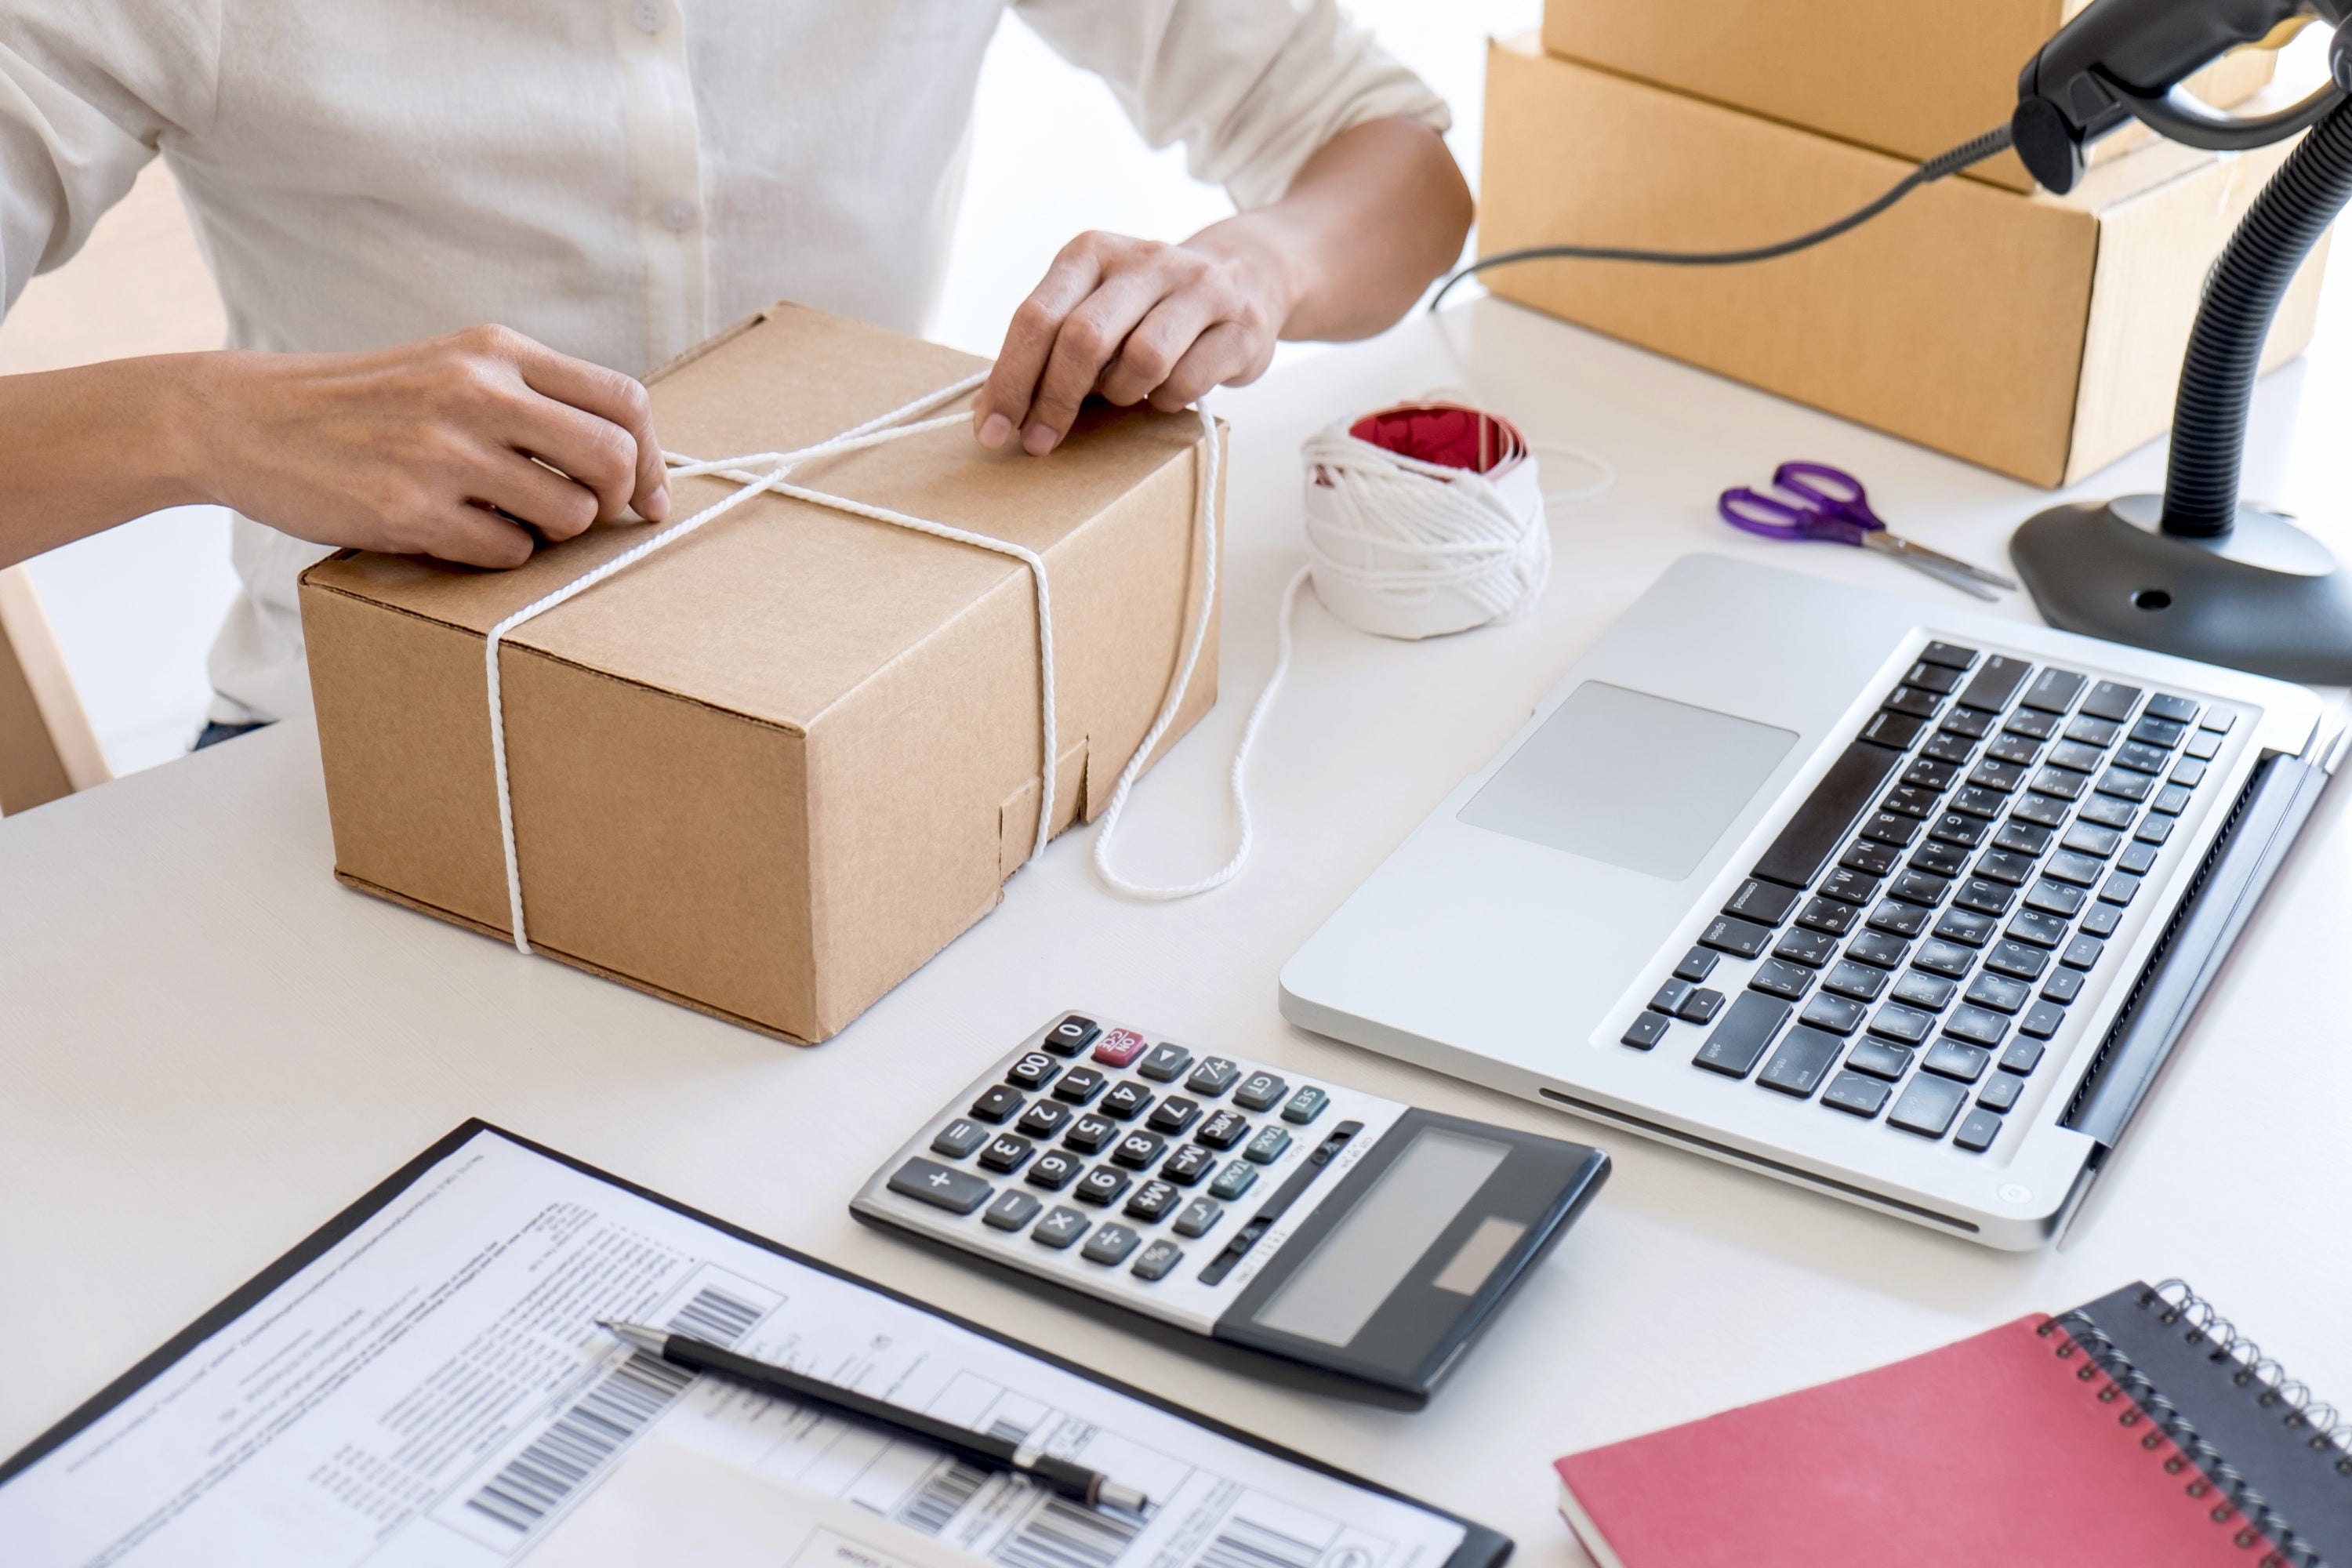 Shipment Online Sales, Small business or SME entrepreneur owner delivery service and working packing box, business owner working checking order to confirm before sending customer in post office.